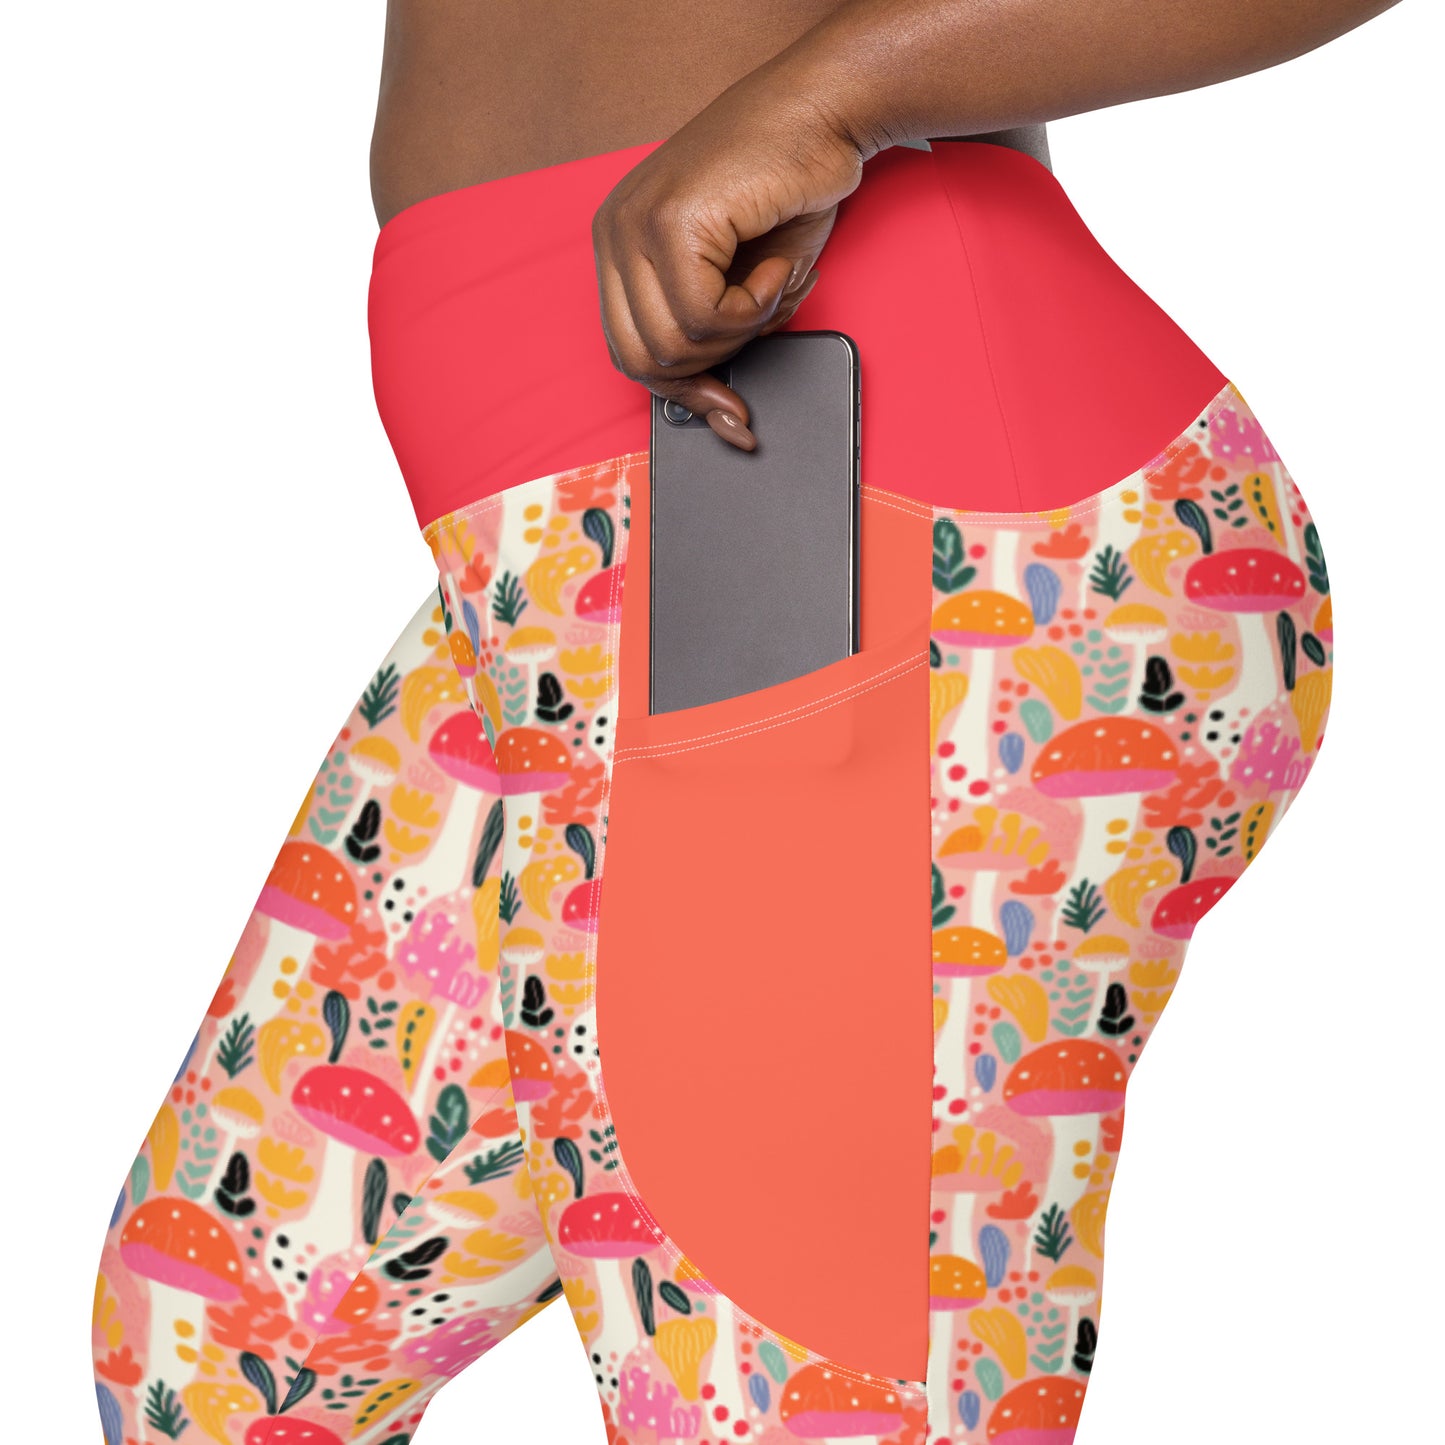 Cotswolds Crossover Waist 7/8 Recycled Yoga Leggings / Yoga Pants with Pockets